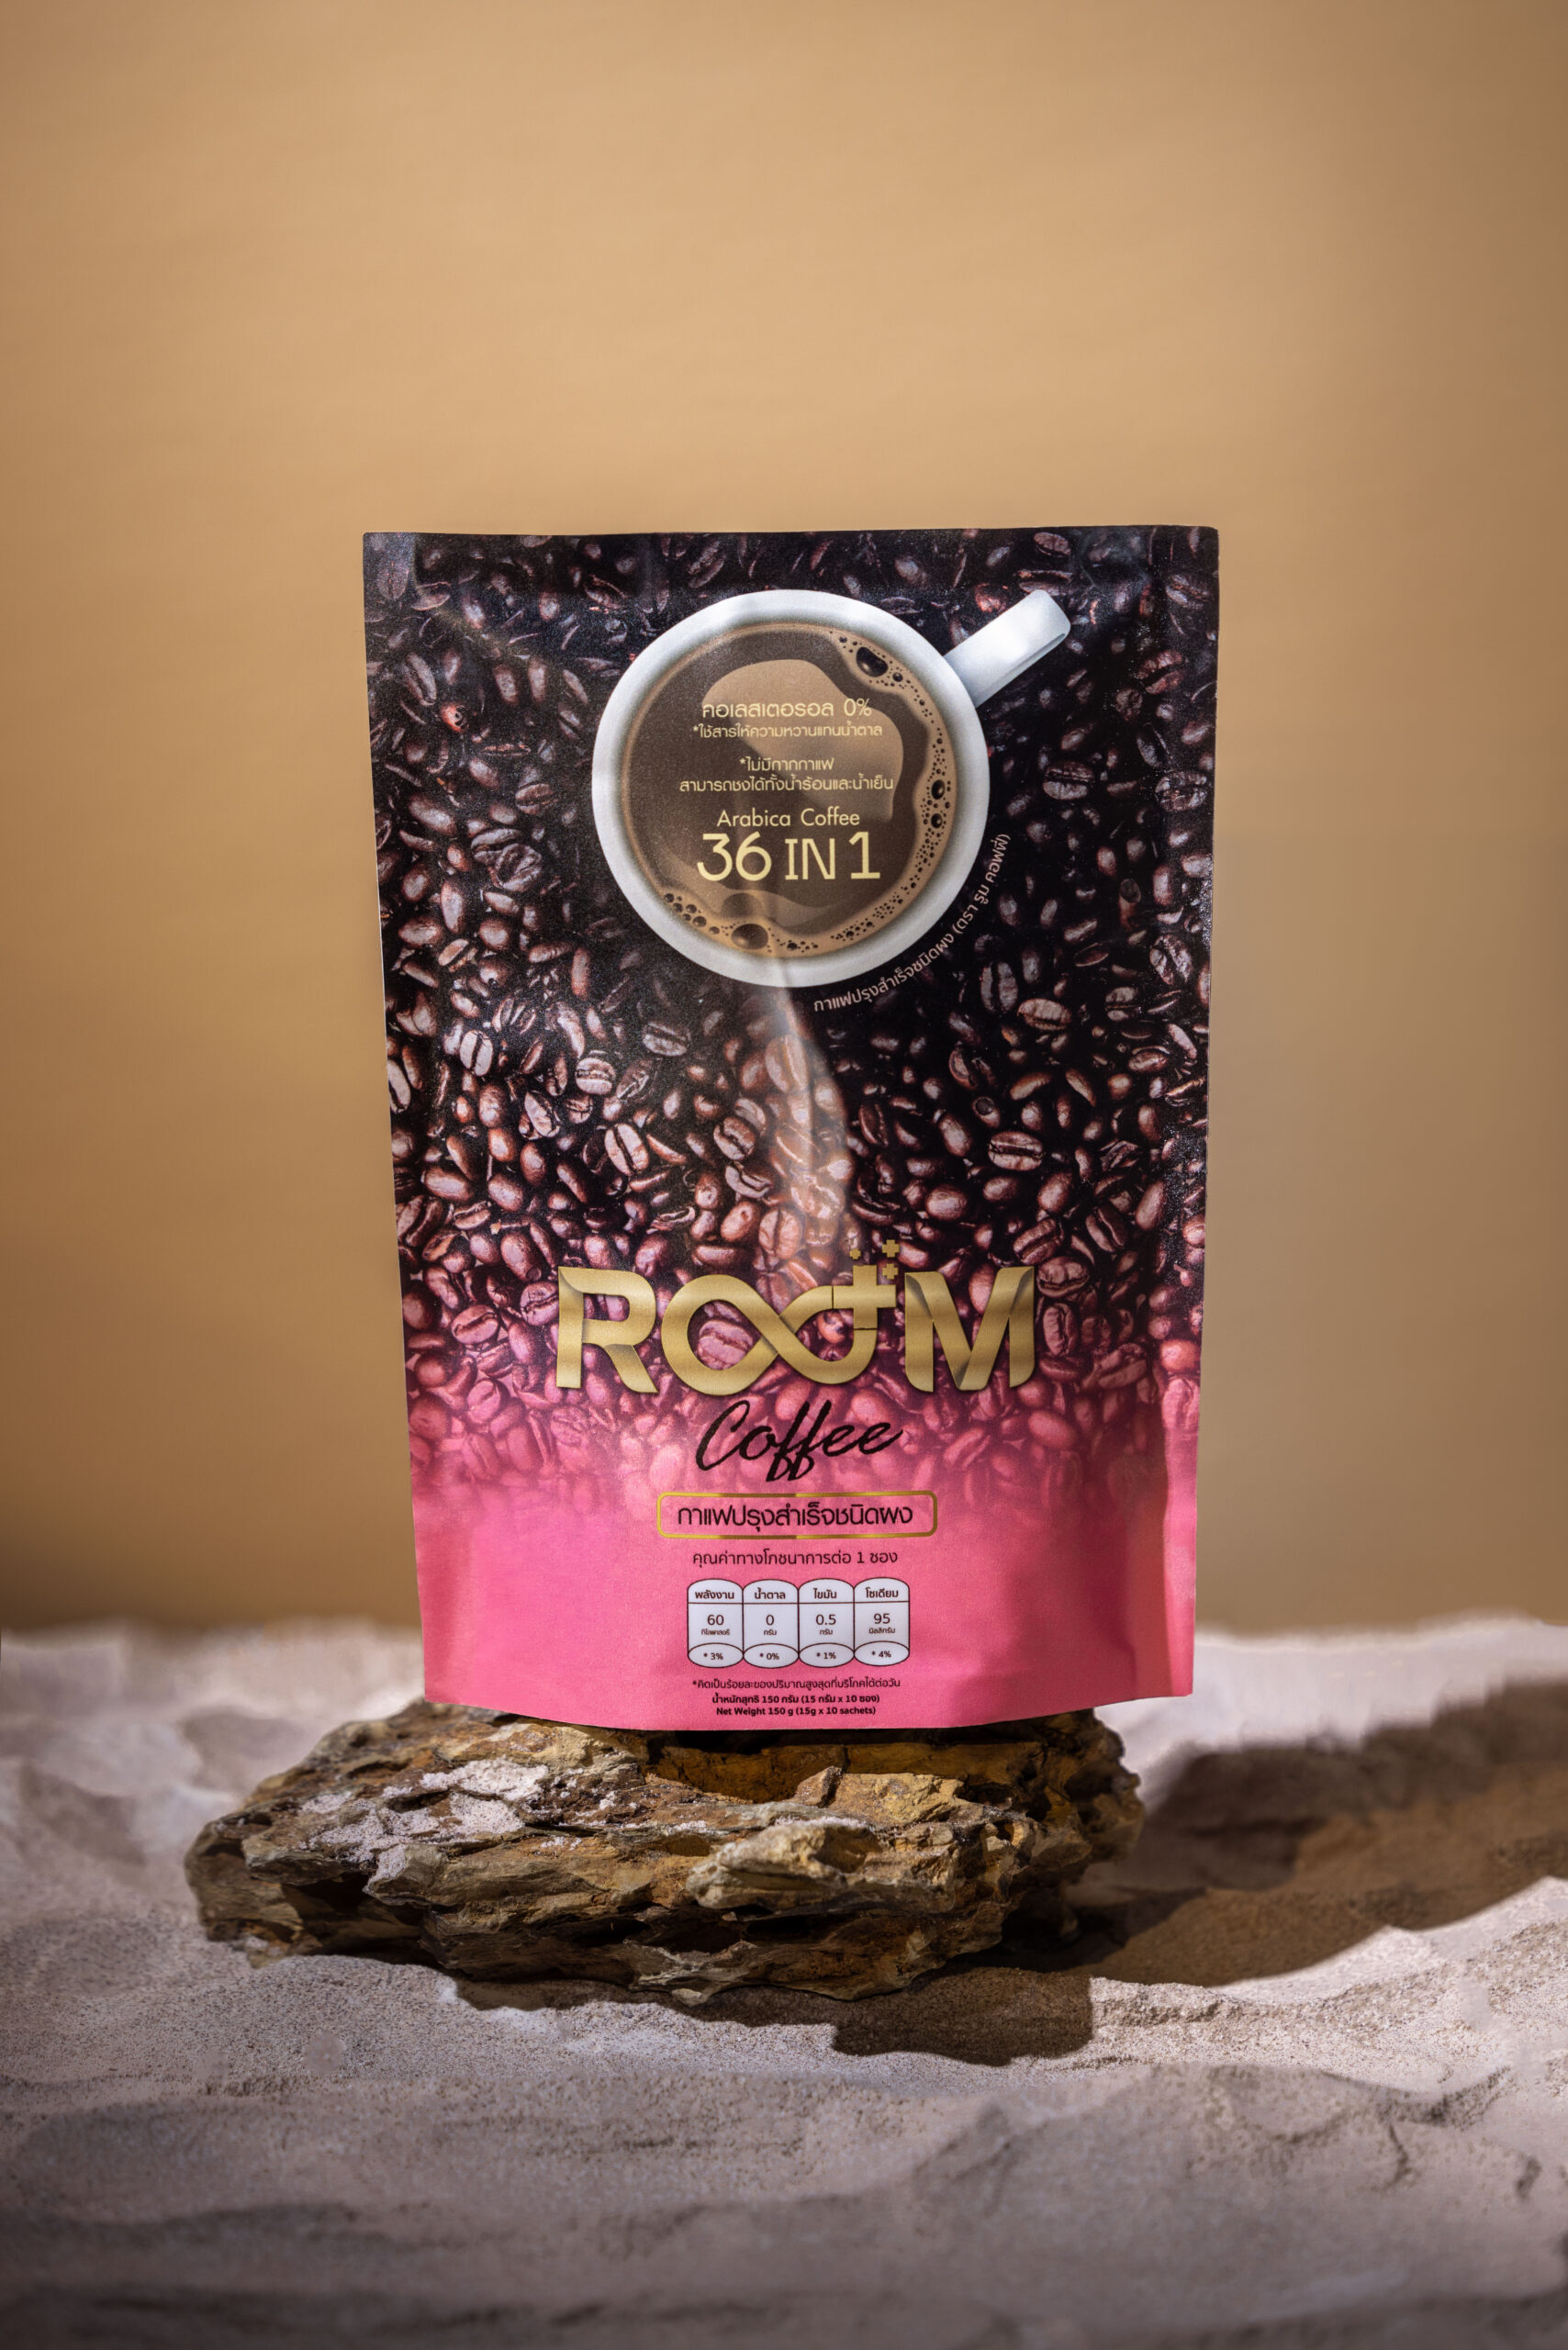 Room Coffee Product Image R5C_1224 - The iCon Group